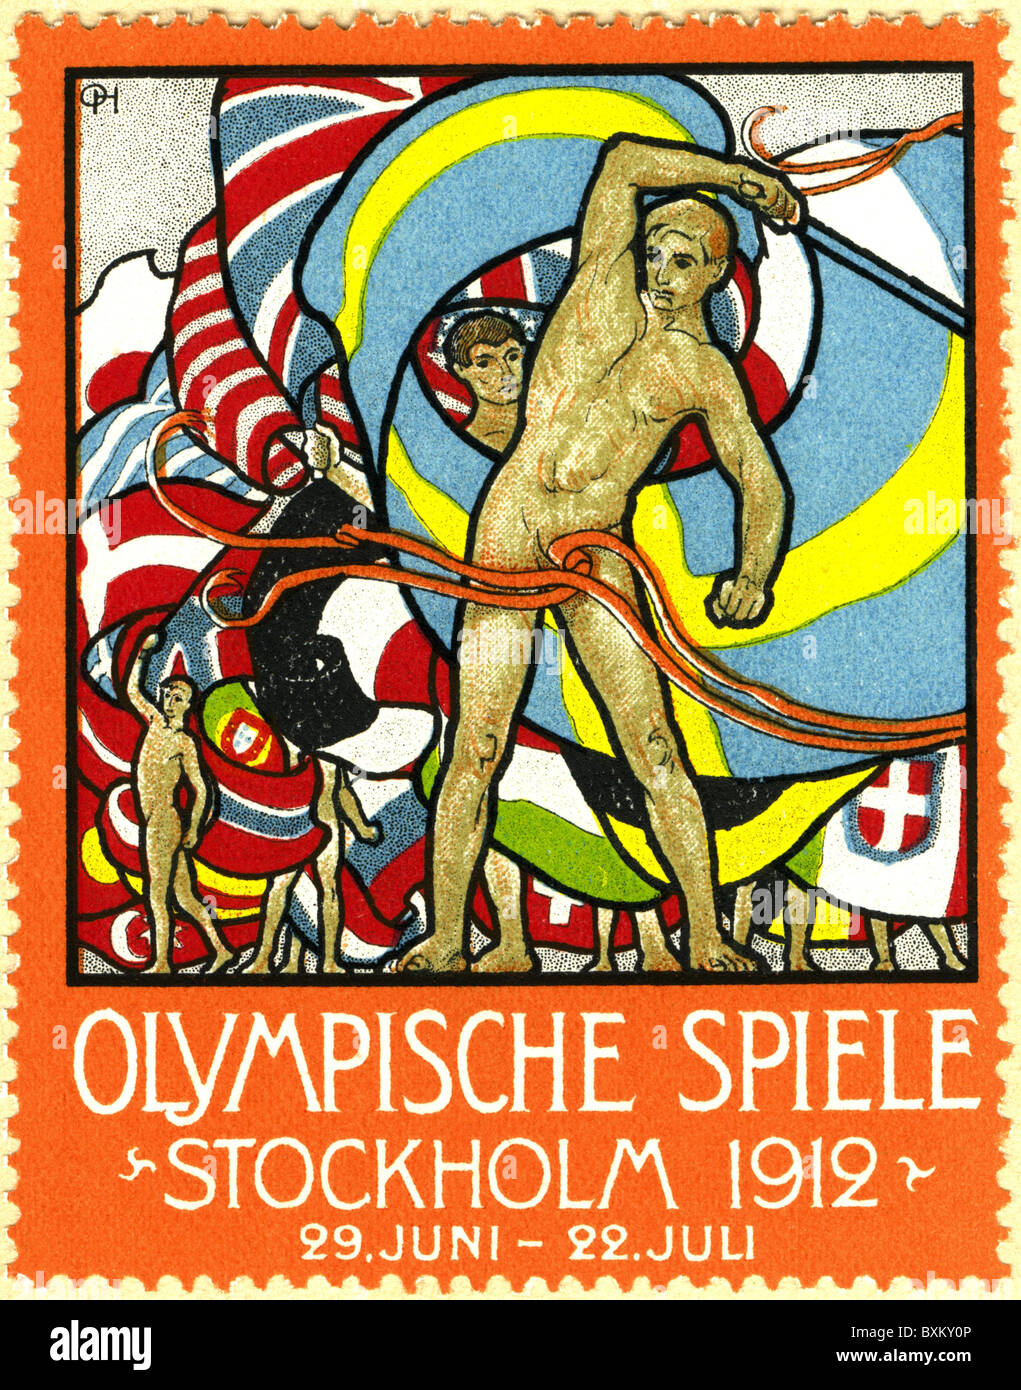 sports, 5th Olympic Games, advertising stamp, Stockholm, Sweden, 1912, Additional-Rights-Clearences-Not Available Stock Photo